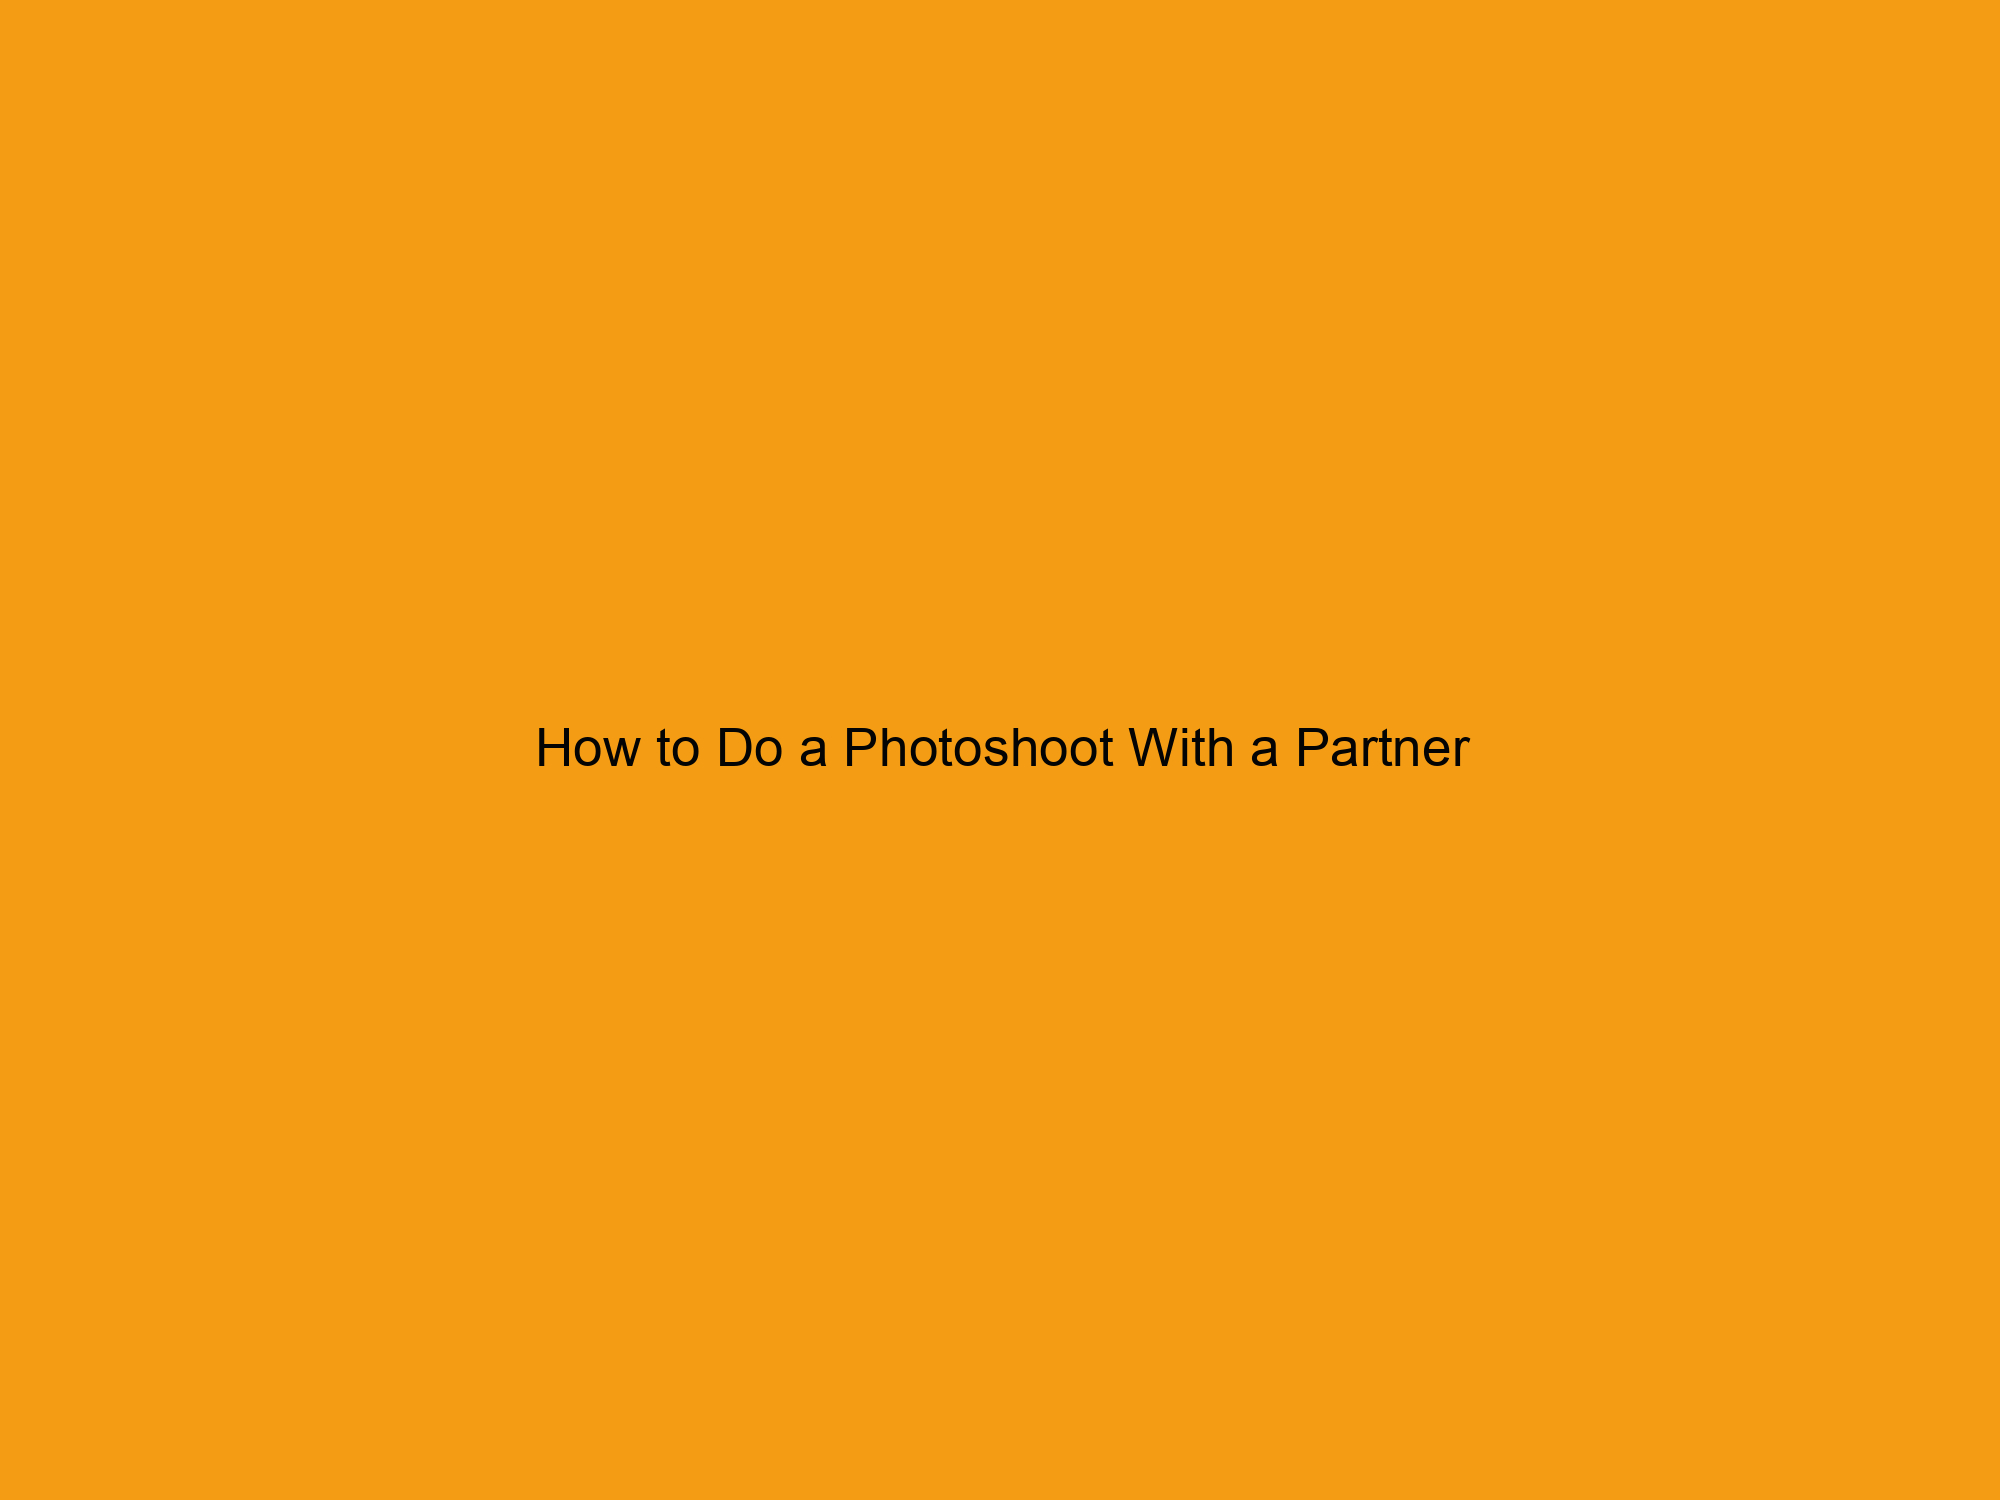 How to Do a Photoshoot With a Partner